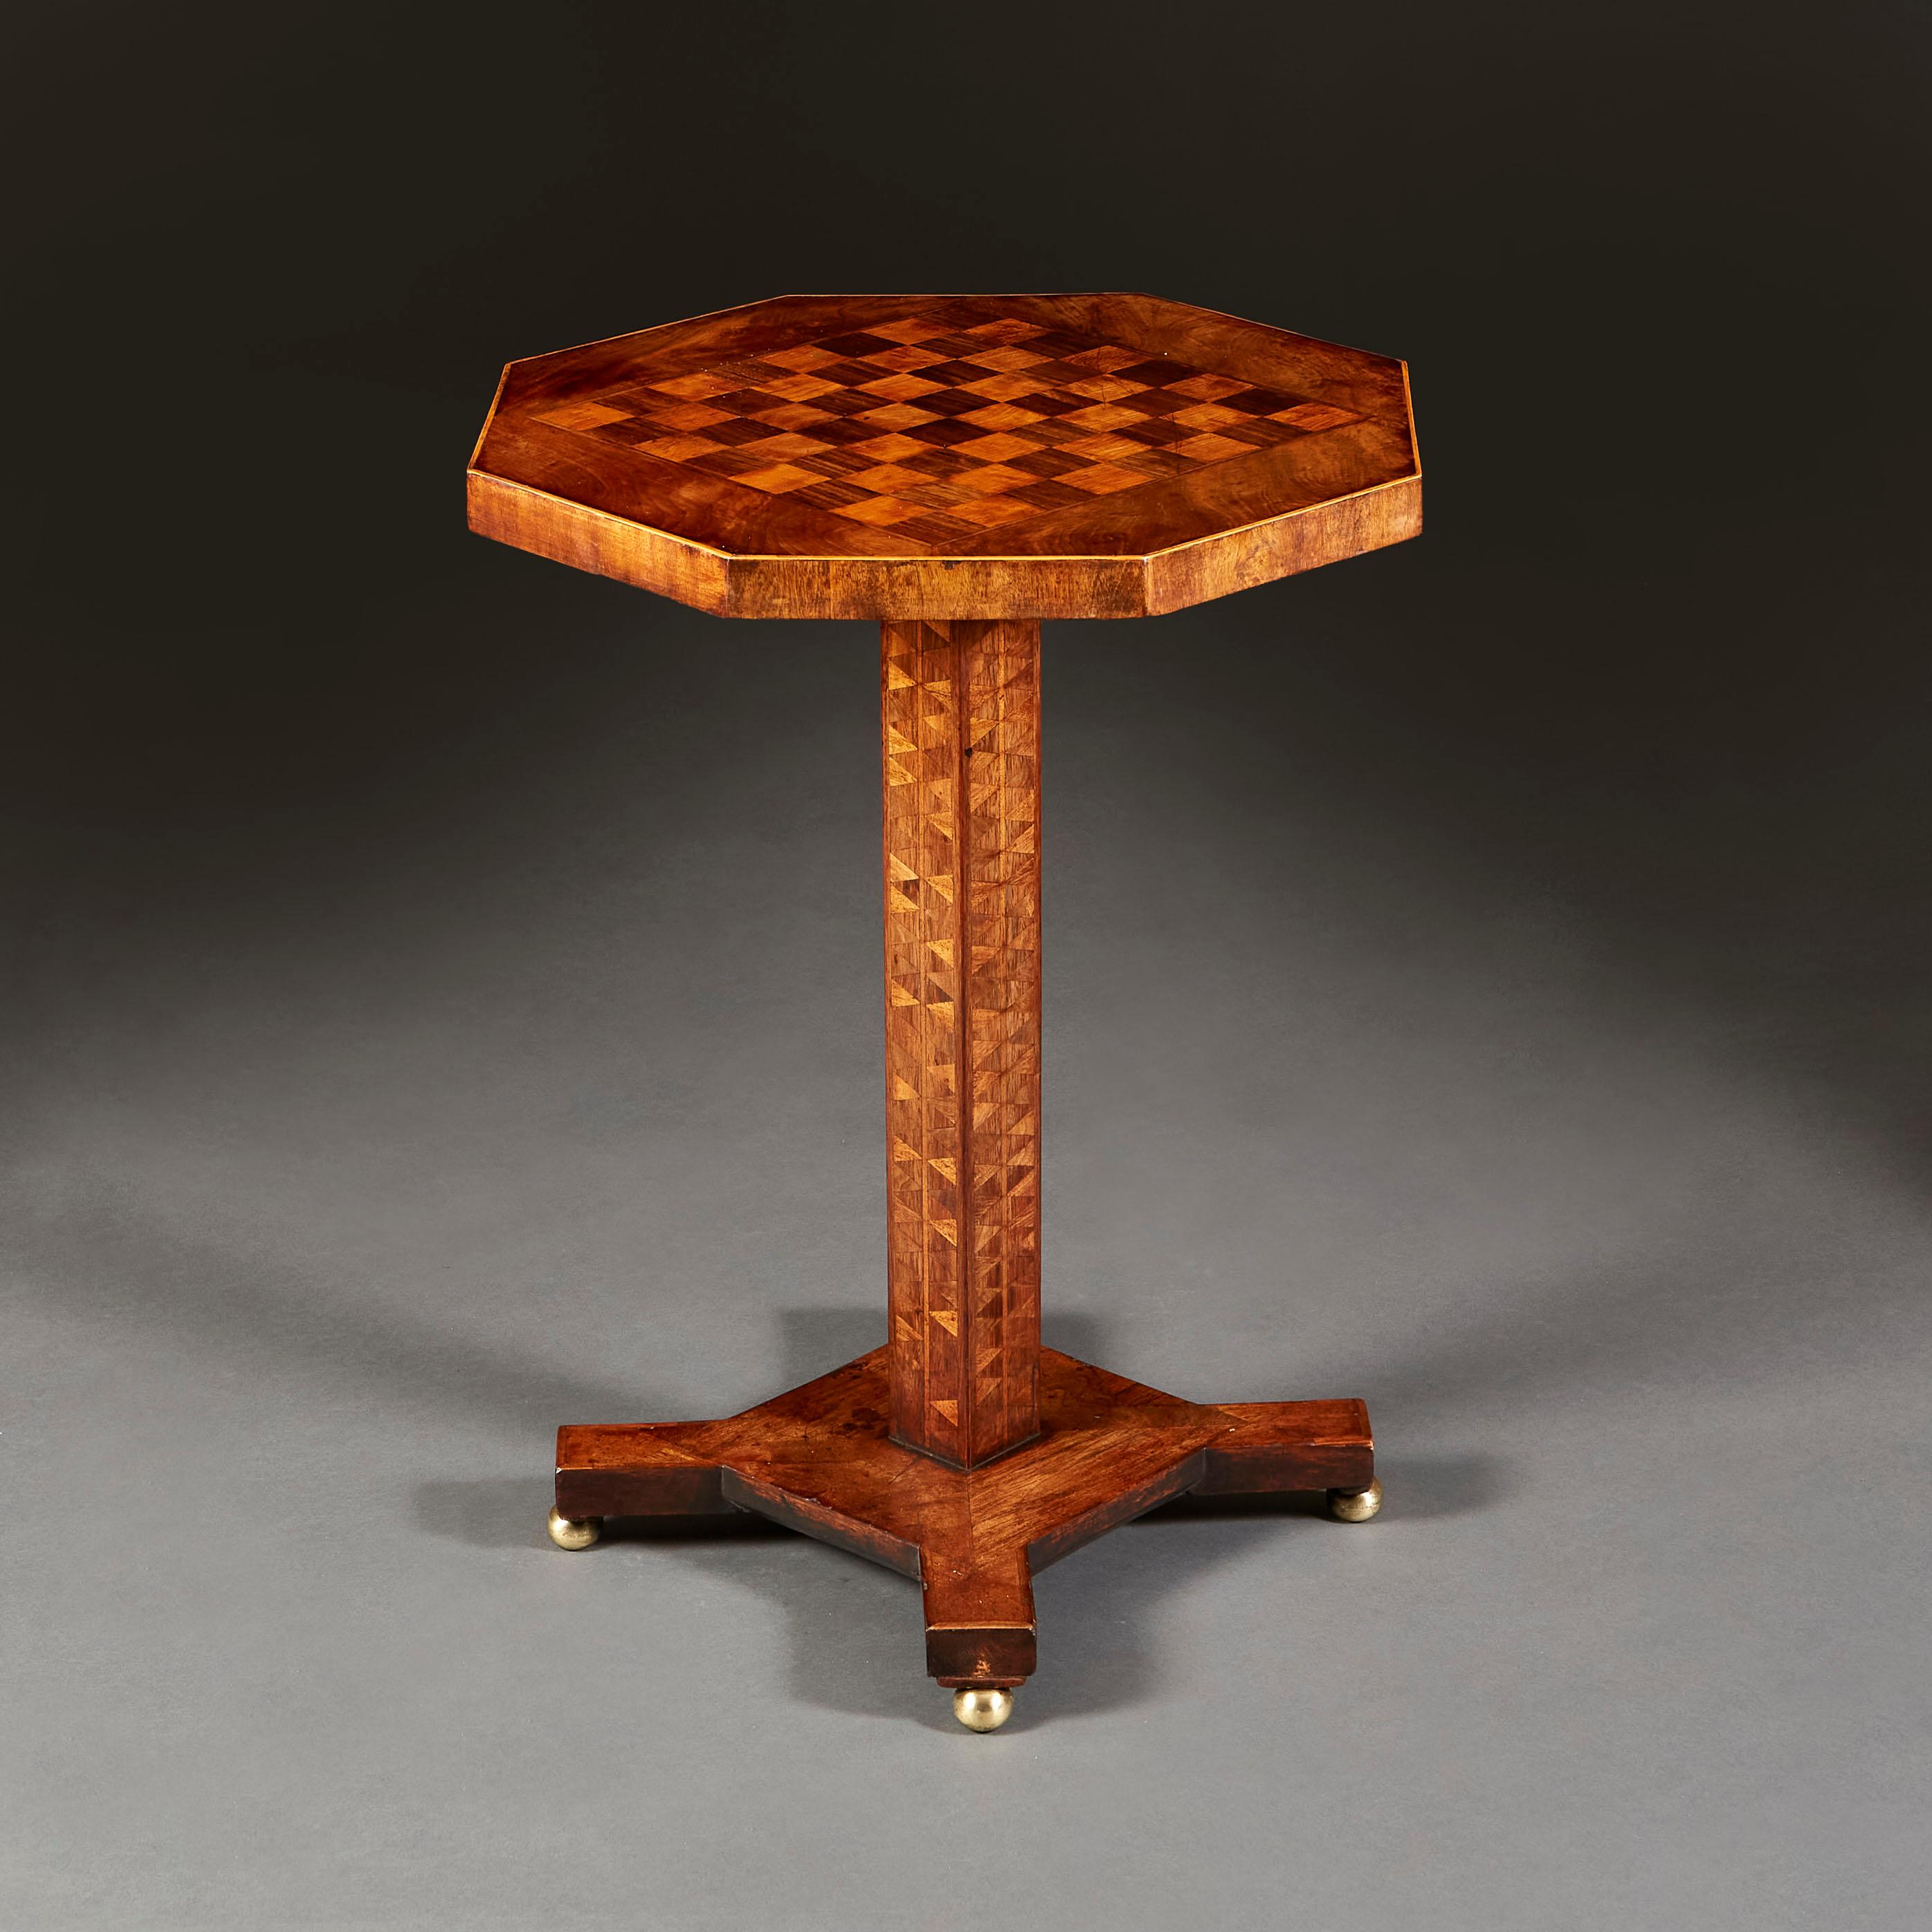 English Regency Marquetry Table with Chessboard Top